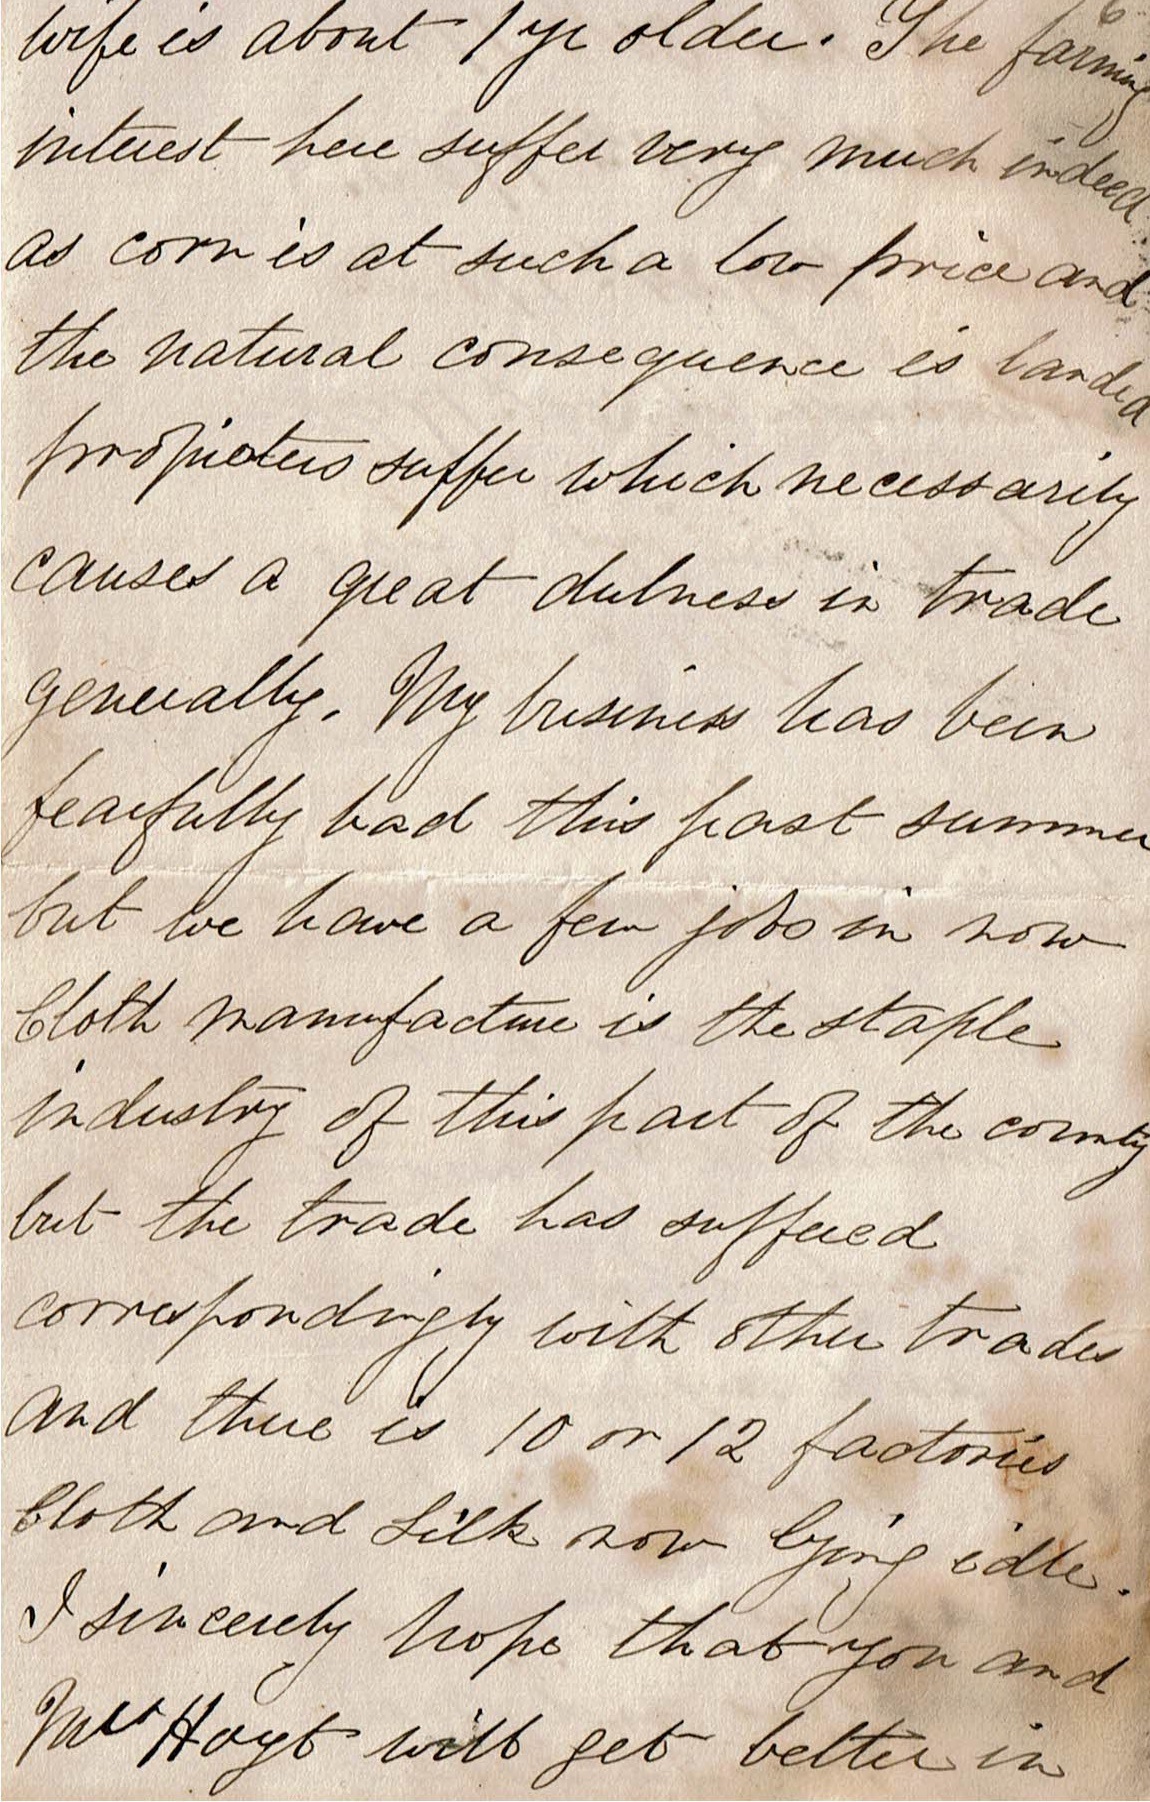 Image of page 6 of Peter's letter